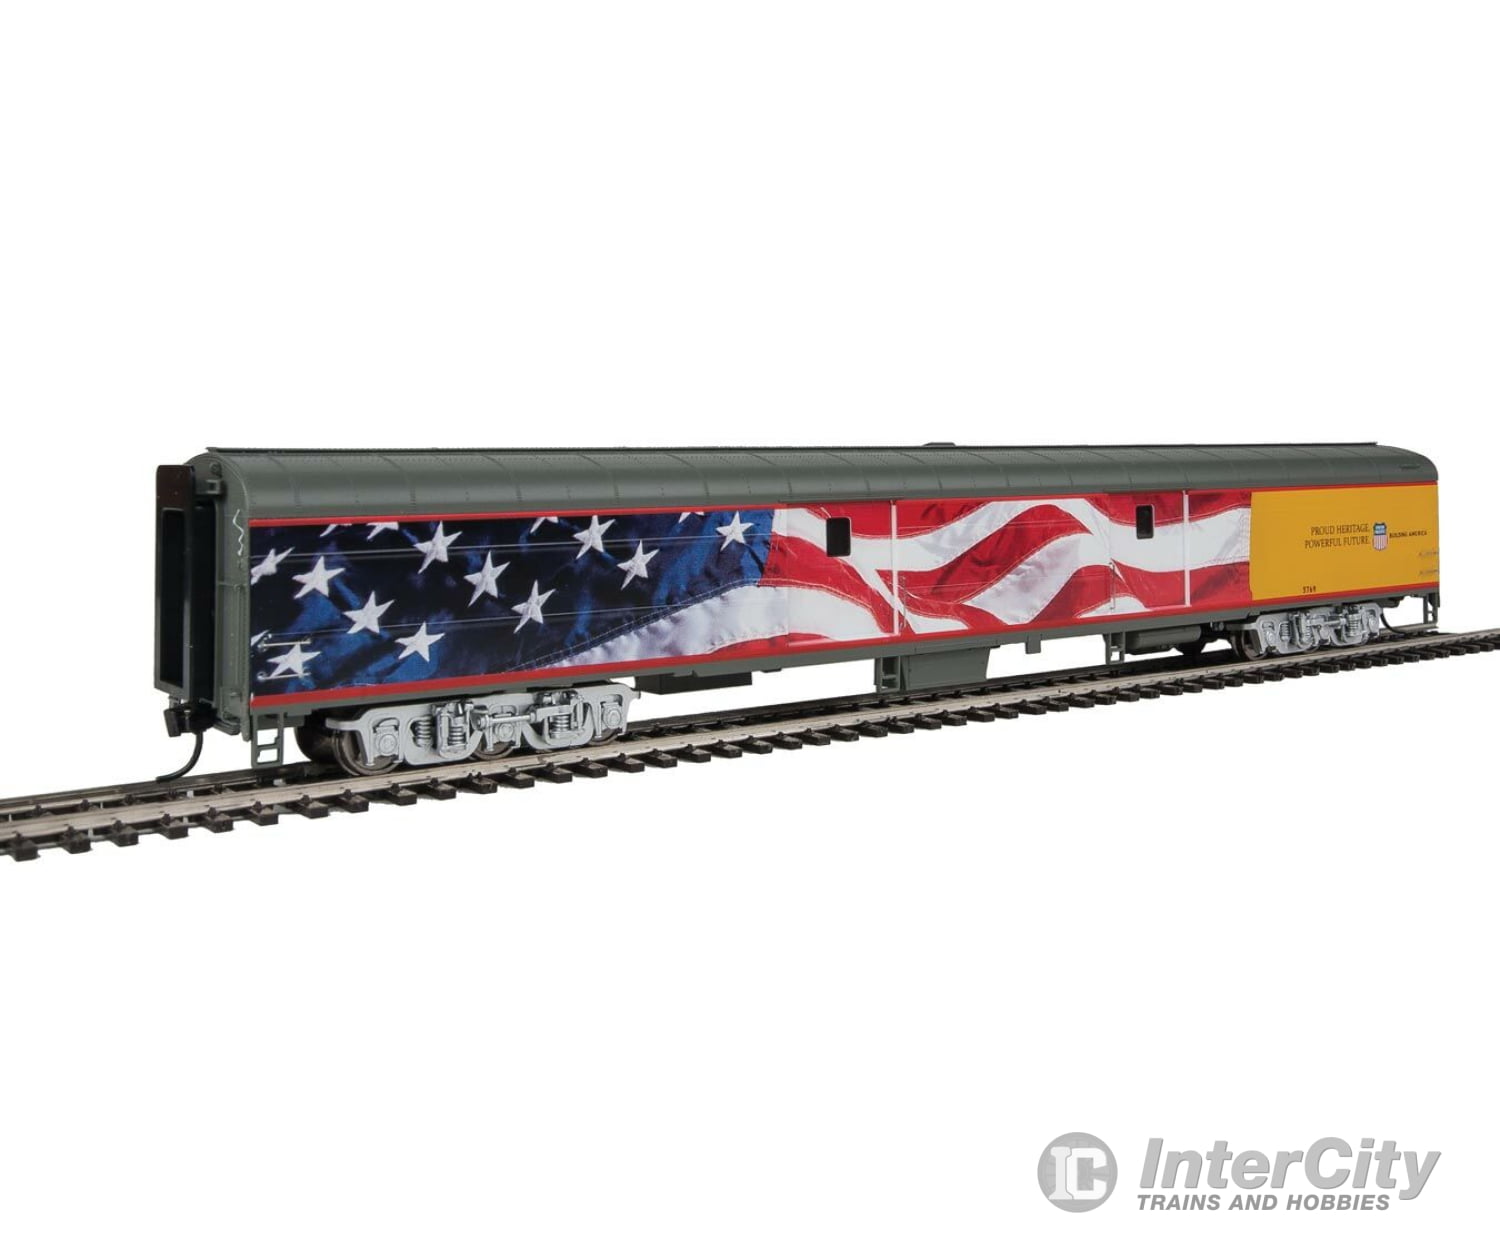 Walthers Proto 9205 85 Acf Baggage Car - Standard Union Pacific(R) Heritage Fleet -- #5779 American